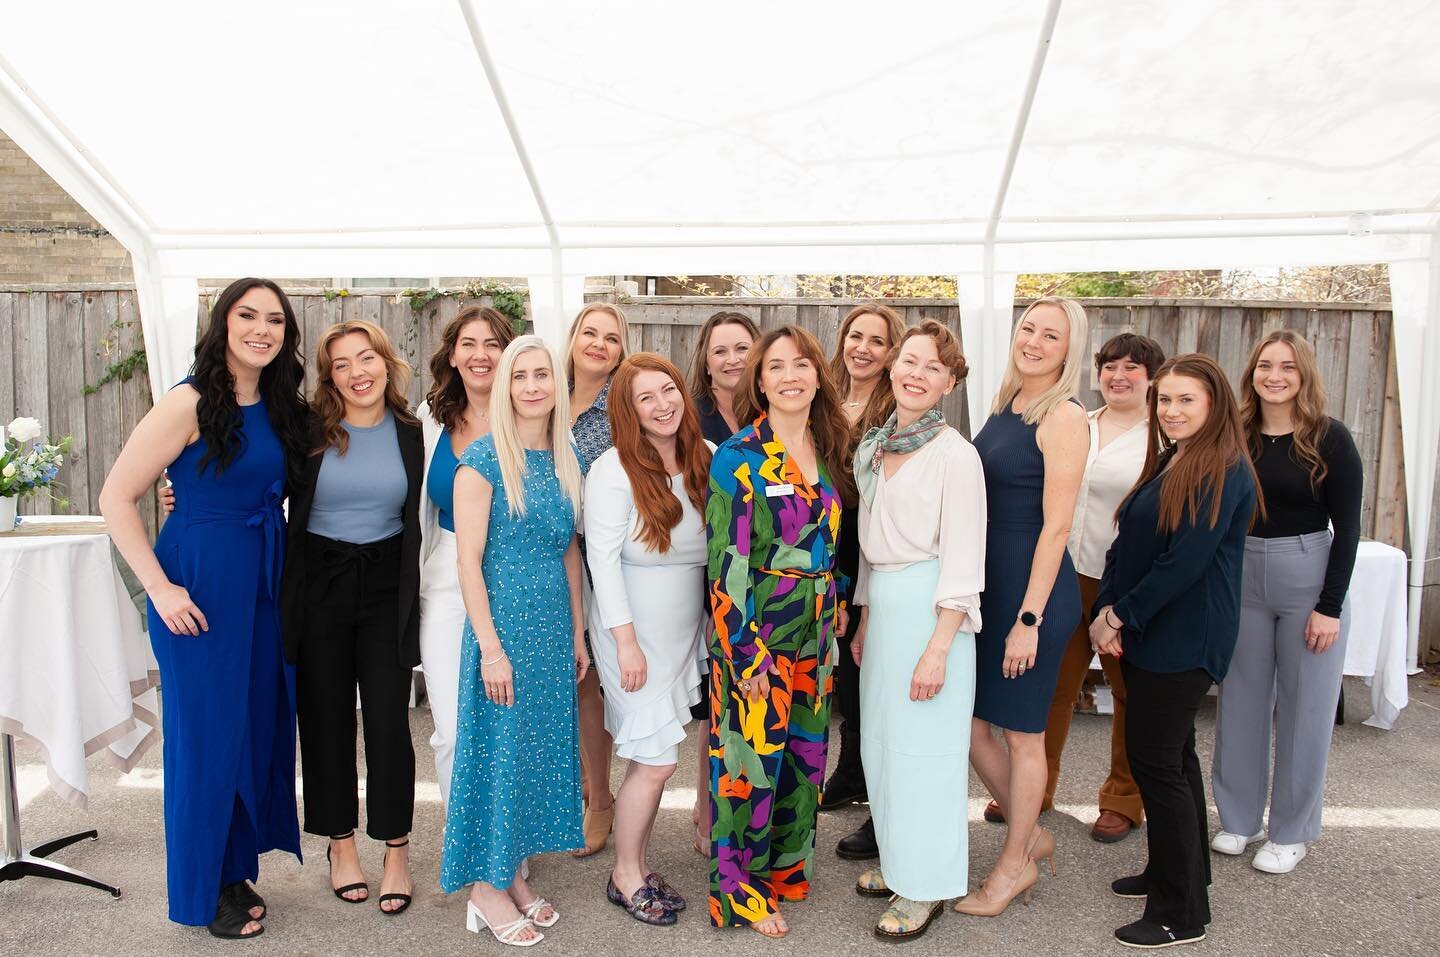 Team appreciation post! 💙 

Thank you to our all of our staff who help ArtMed run well for our clients, day in and day out. 

Our mission is to provide a comprehensive range of treatment options, clinical and technological expertise and exemplary cu